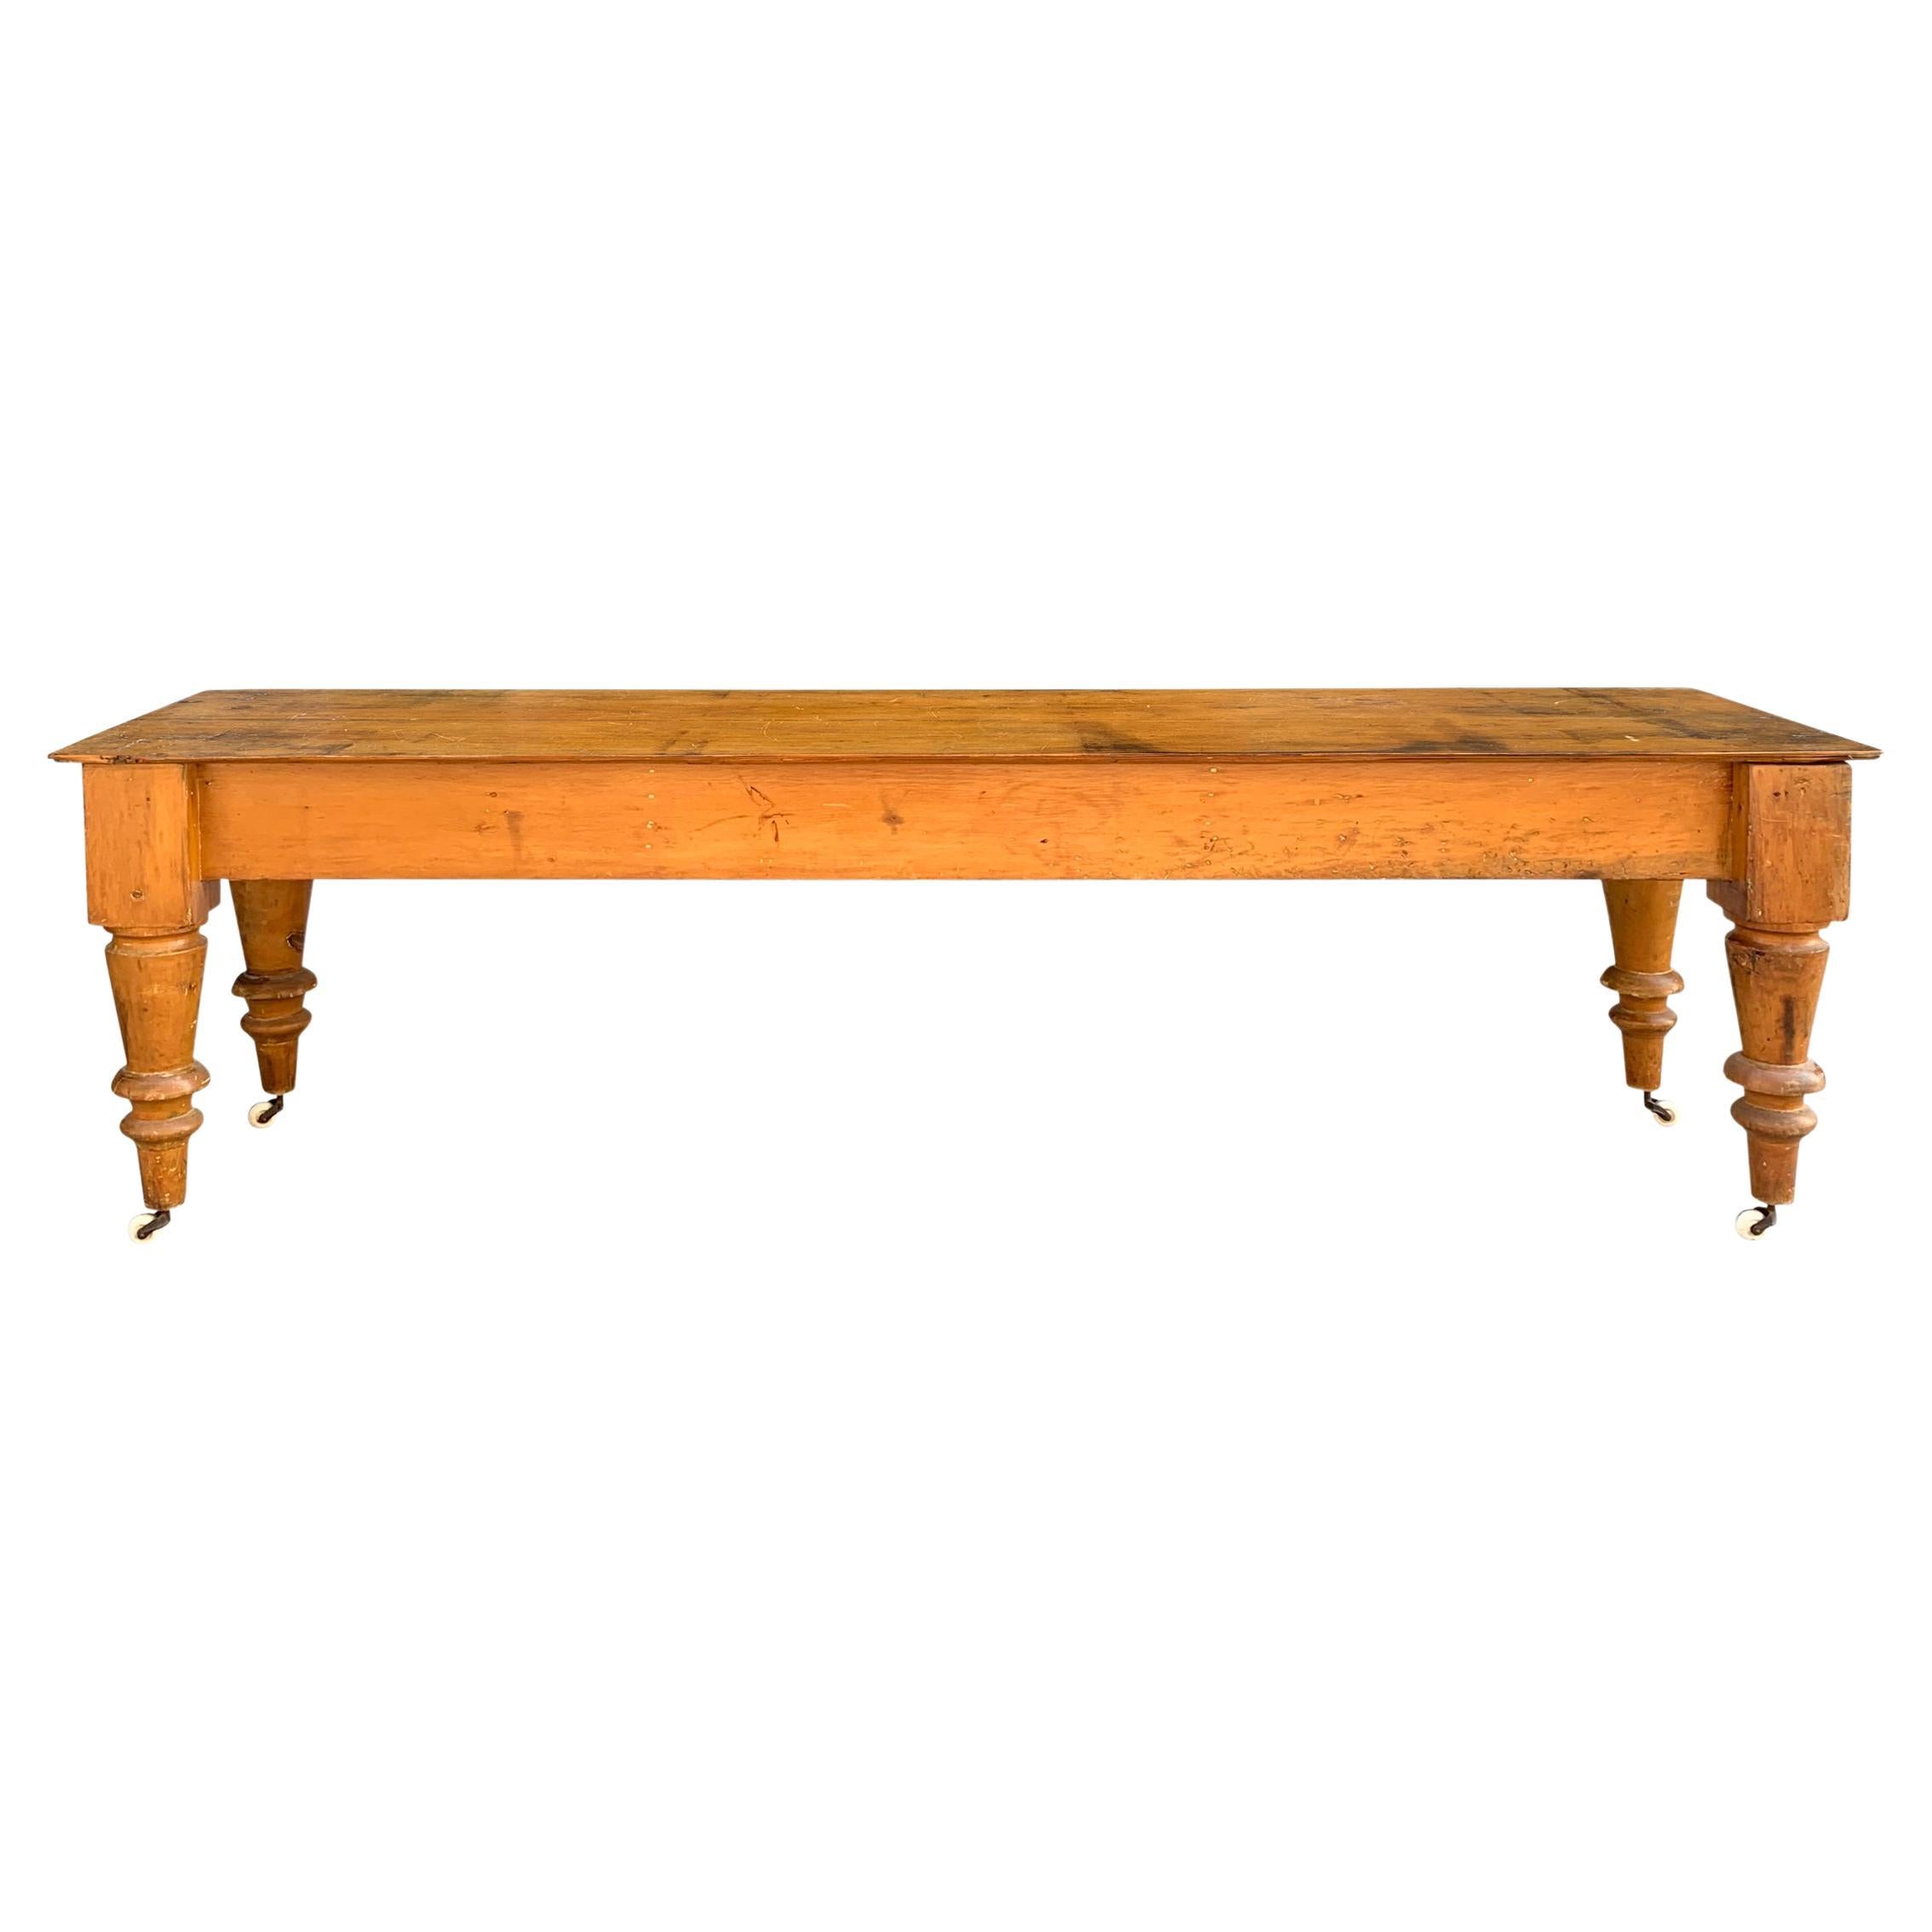 19th Century American Table with Chunky Turned Legs